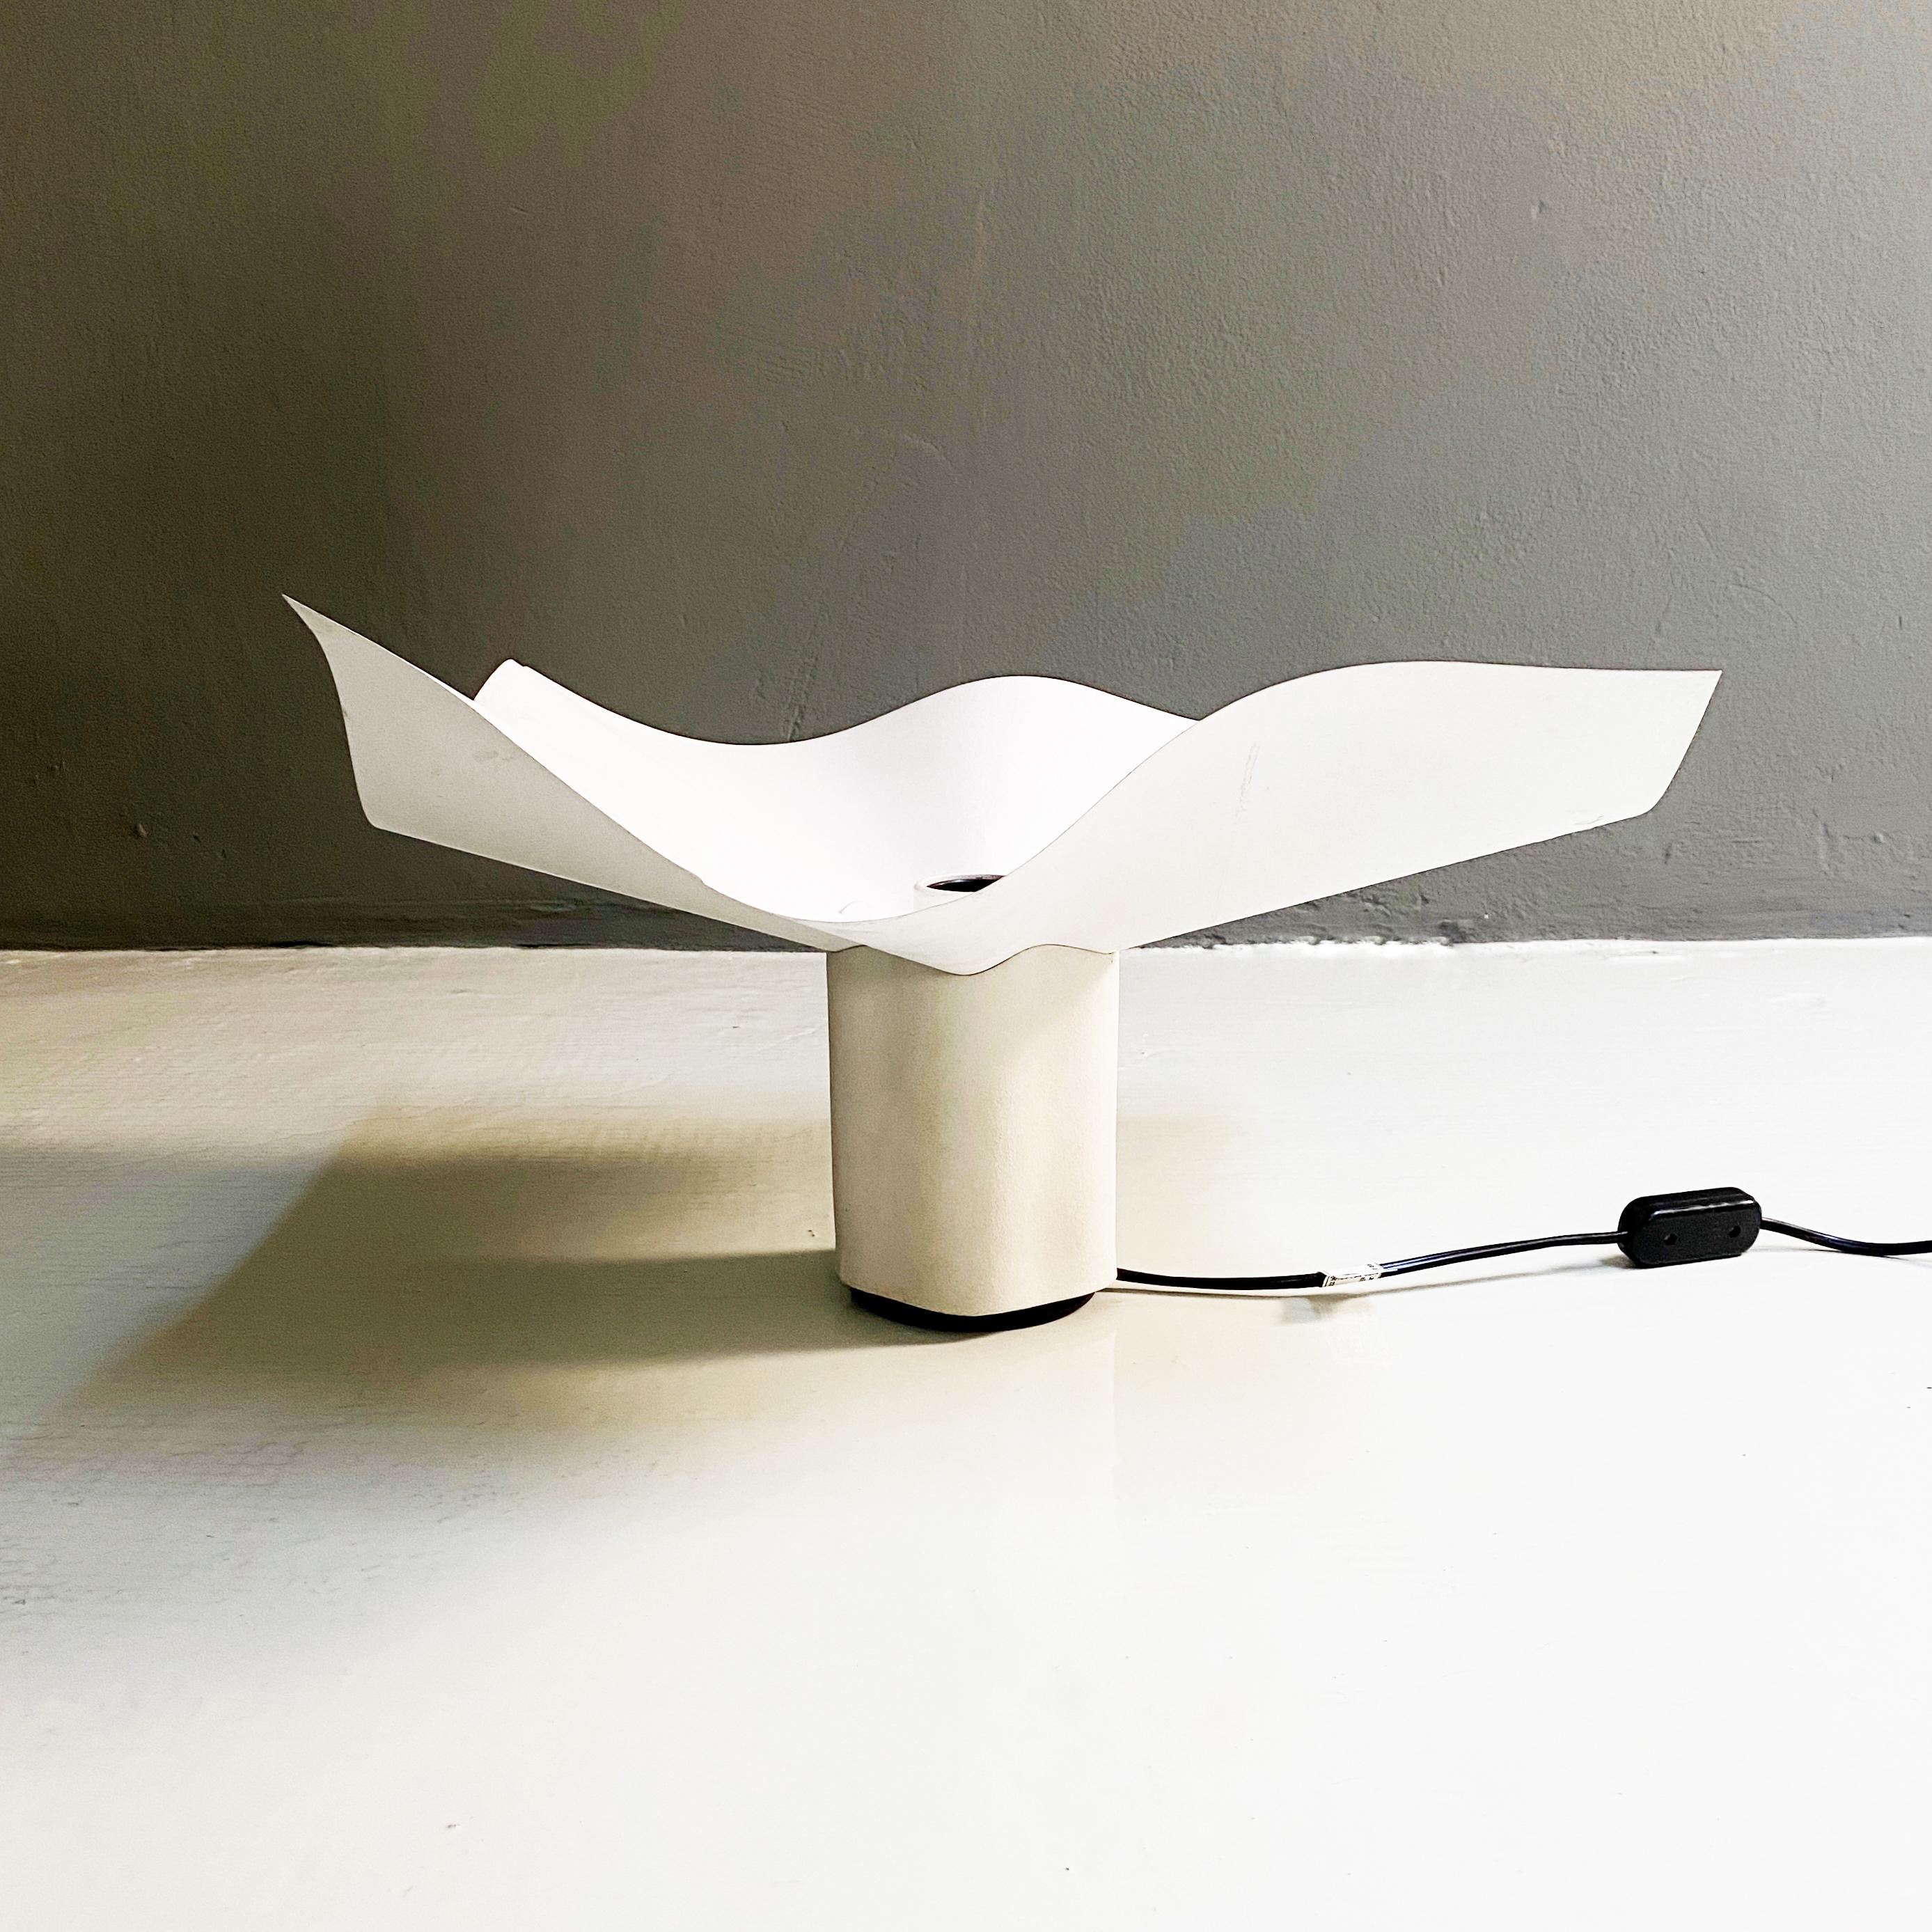 Area table lamp by Mario Bellini for Artemide, 1974

Floor lamp with ceramic base and white resin diffuser. Produced by Artemide and designed by Mario Bellini.
The lamp is exhibited at the MoMA permanent exhibition in New York and at the Victoria